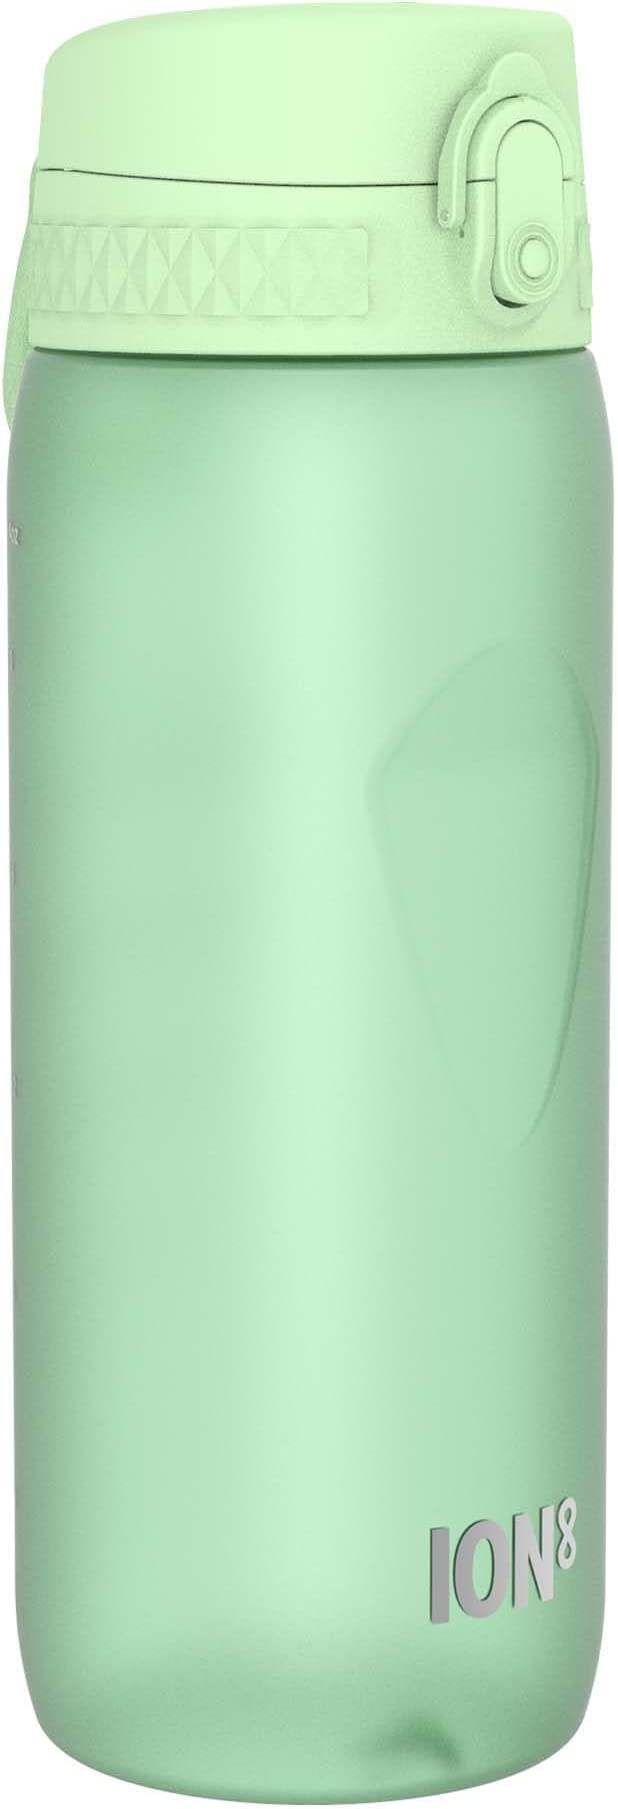 ION8 CYCLING WATER BOTTLE SURF GREEN 750ML